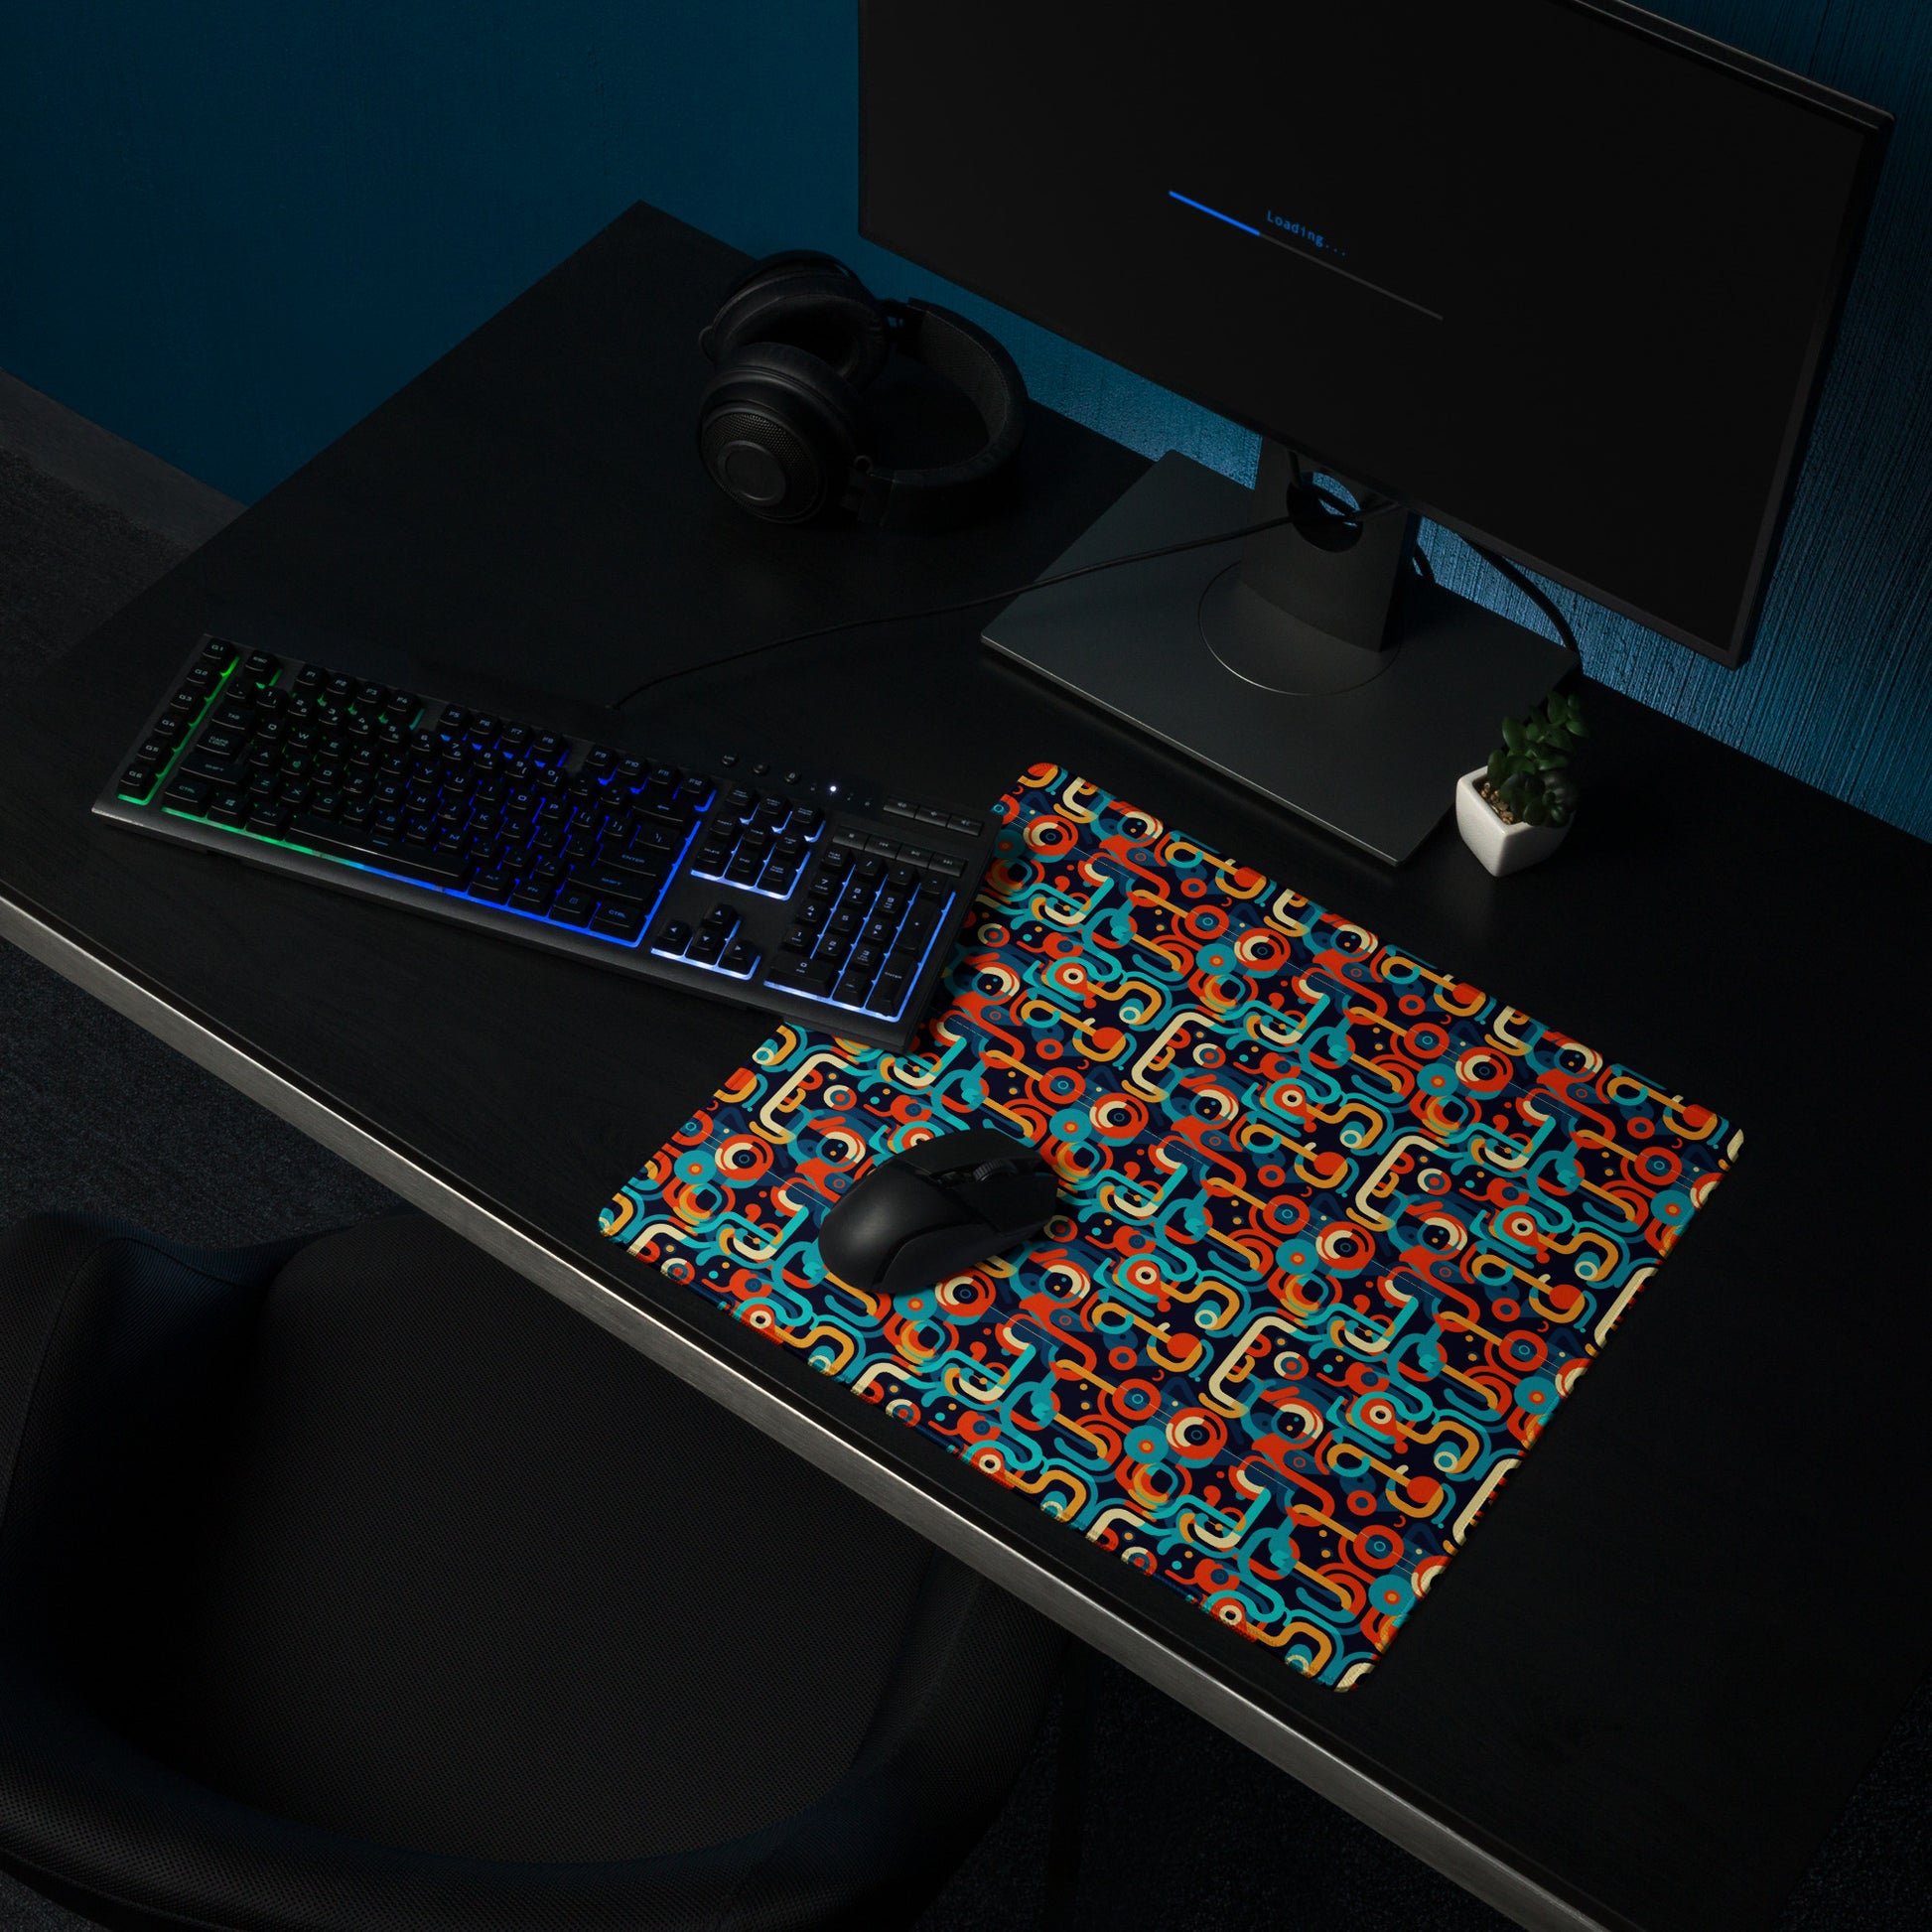 An 18" x 16" gaming desk pad with blue, orange, and beige lines on a black background. It sits on a black desk with a keyboard, monitor, and mouse.